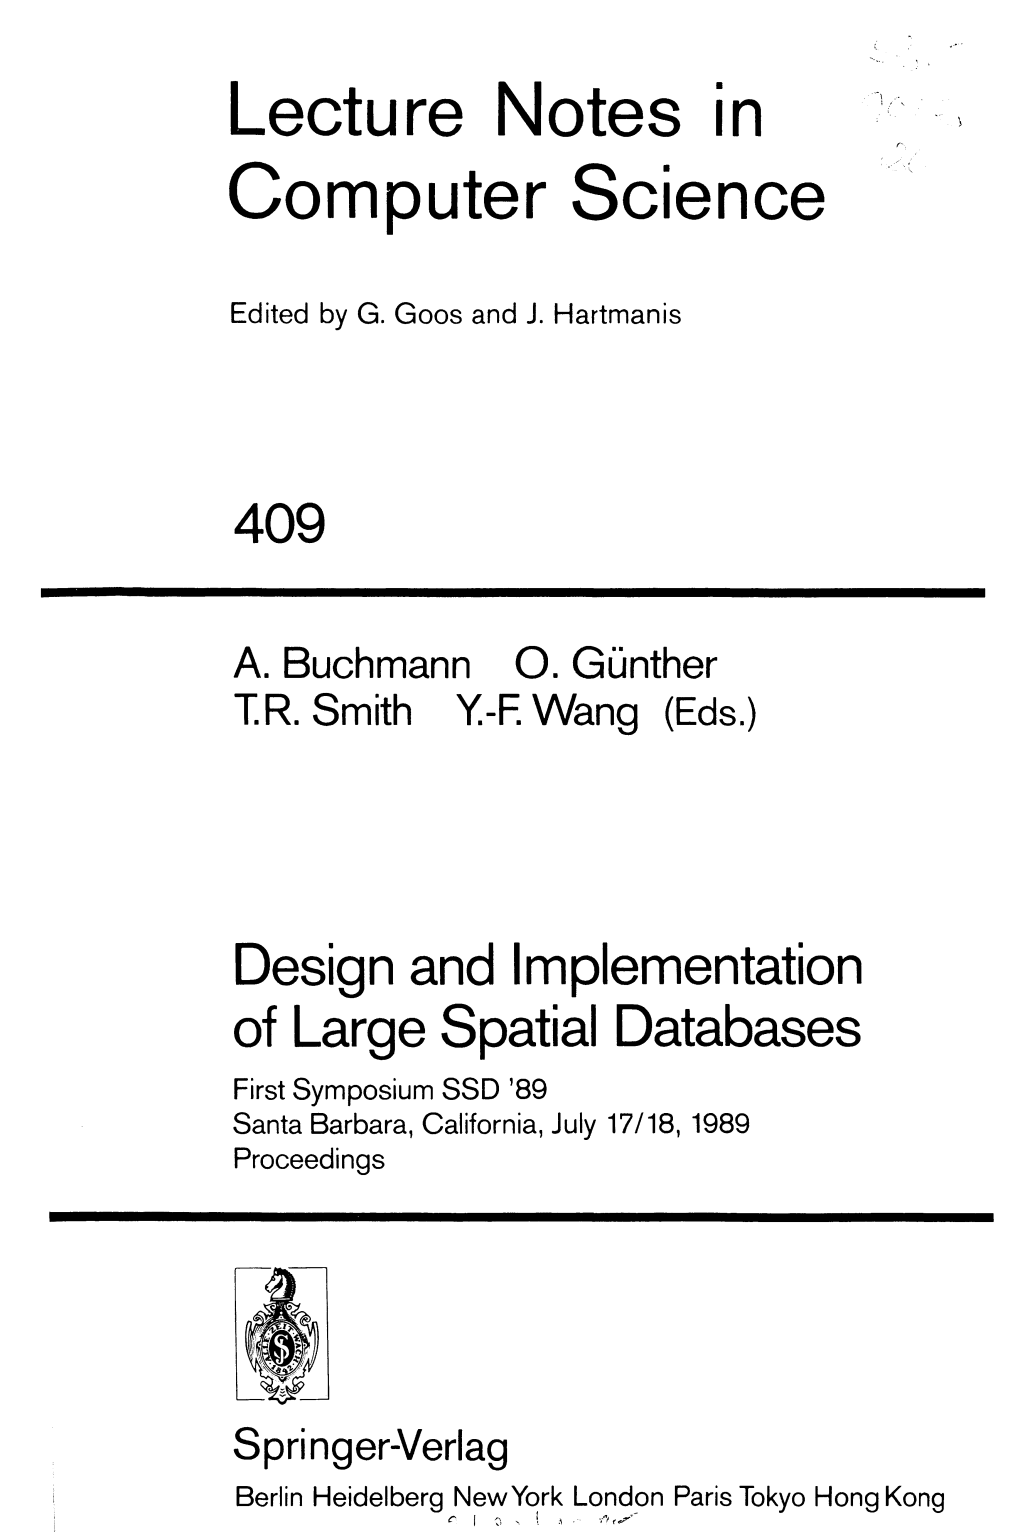 Performance Comparison of Point and Spatial Access Methods